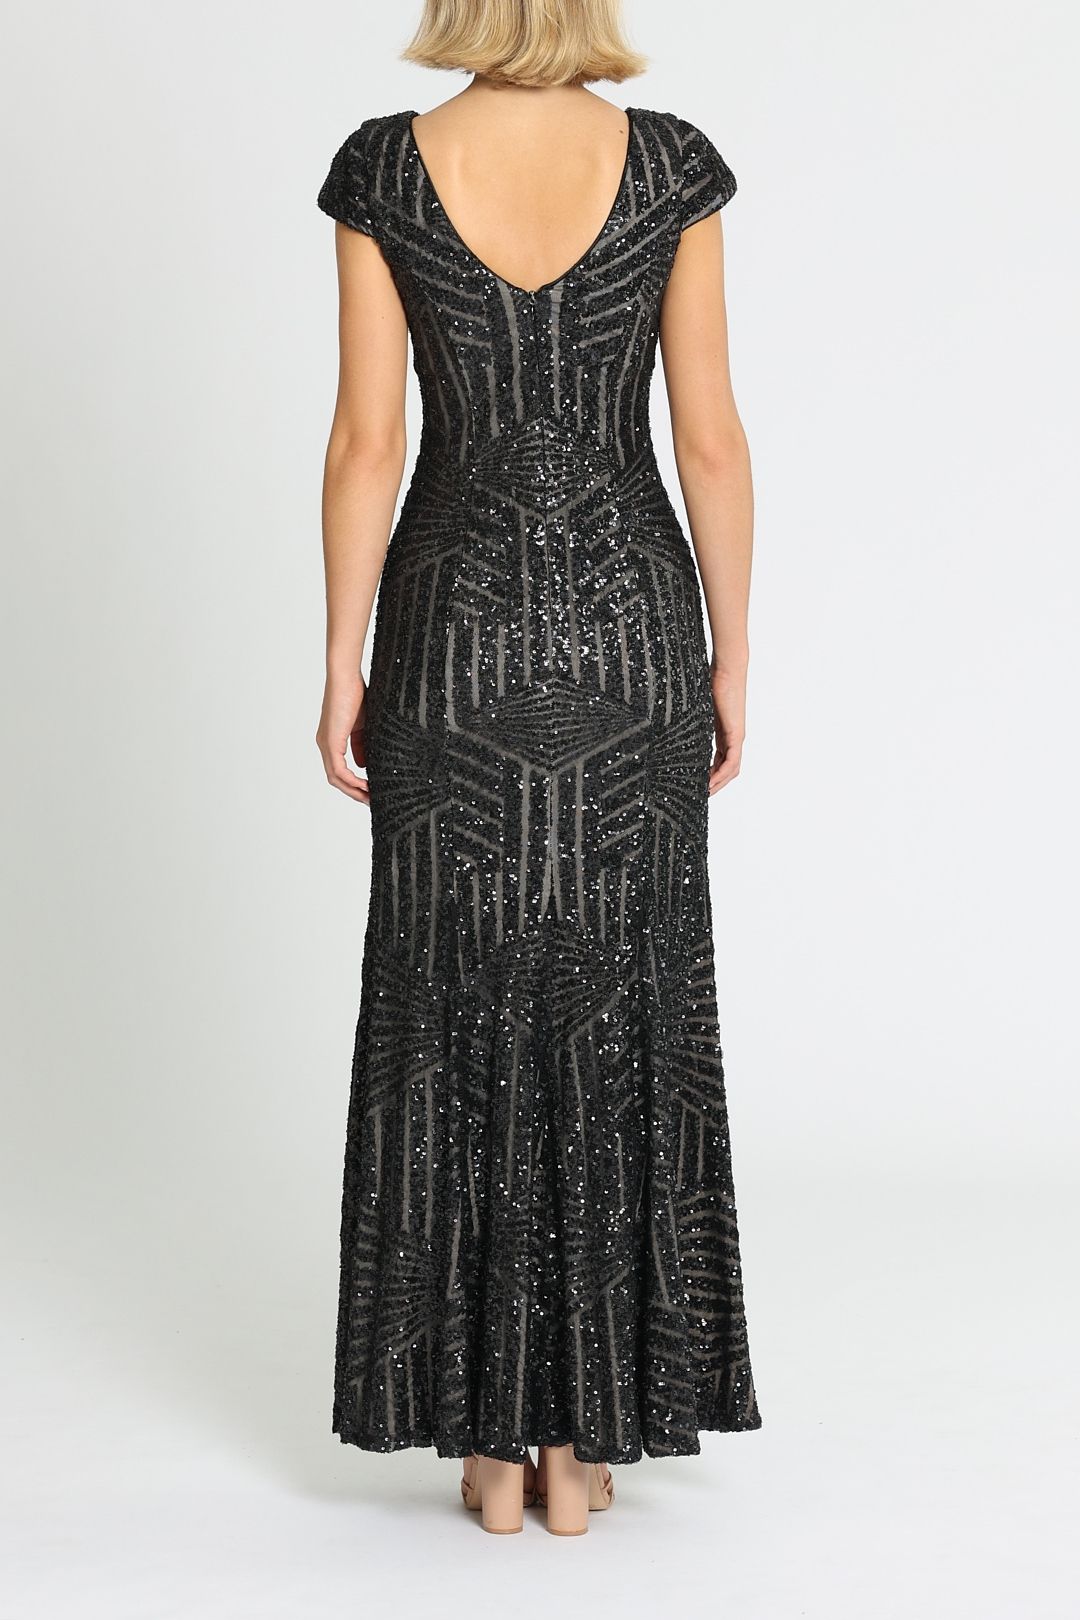 L'Amour Karla Sequin Gown Bodycon